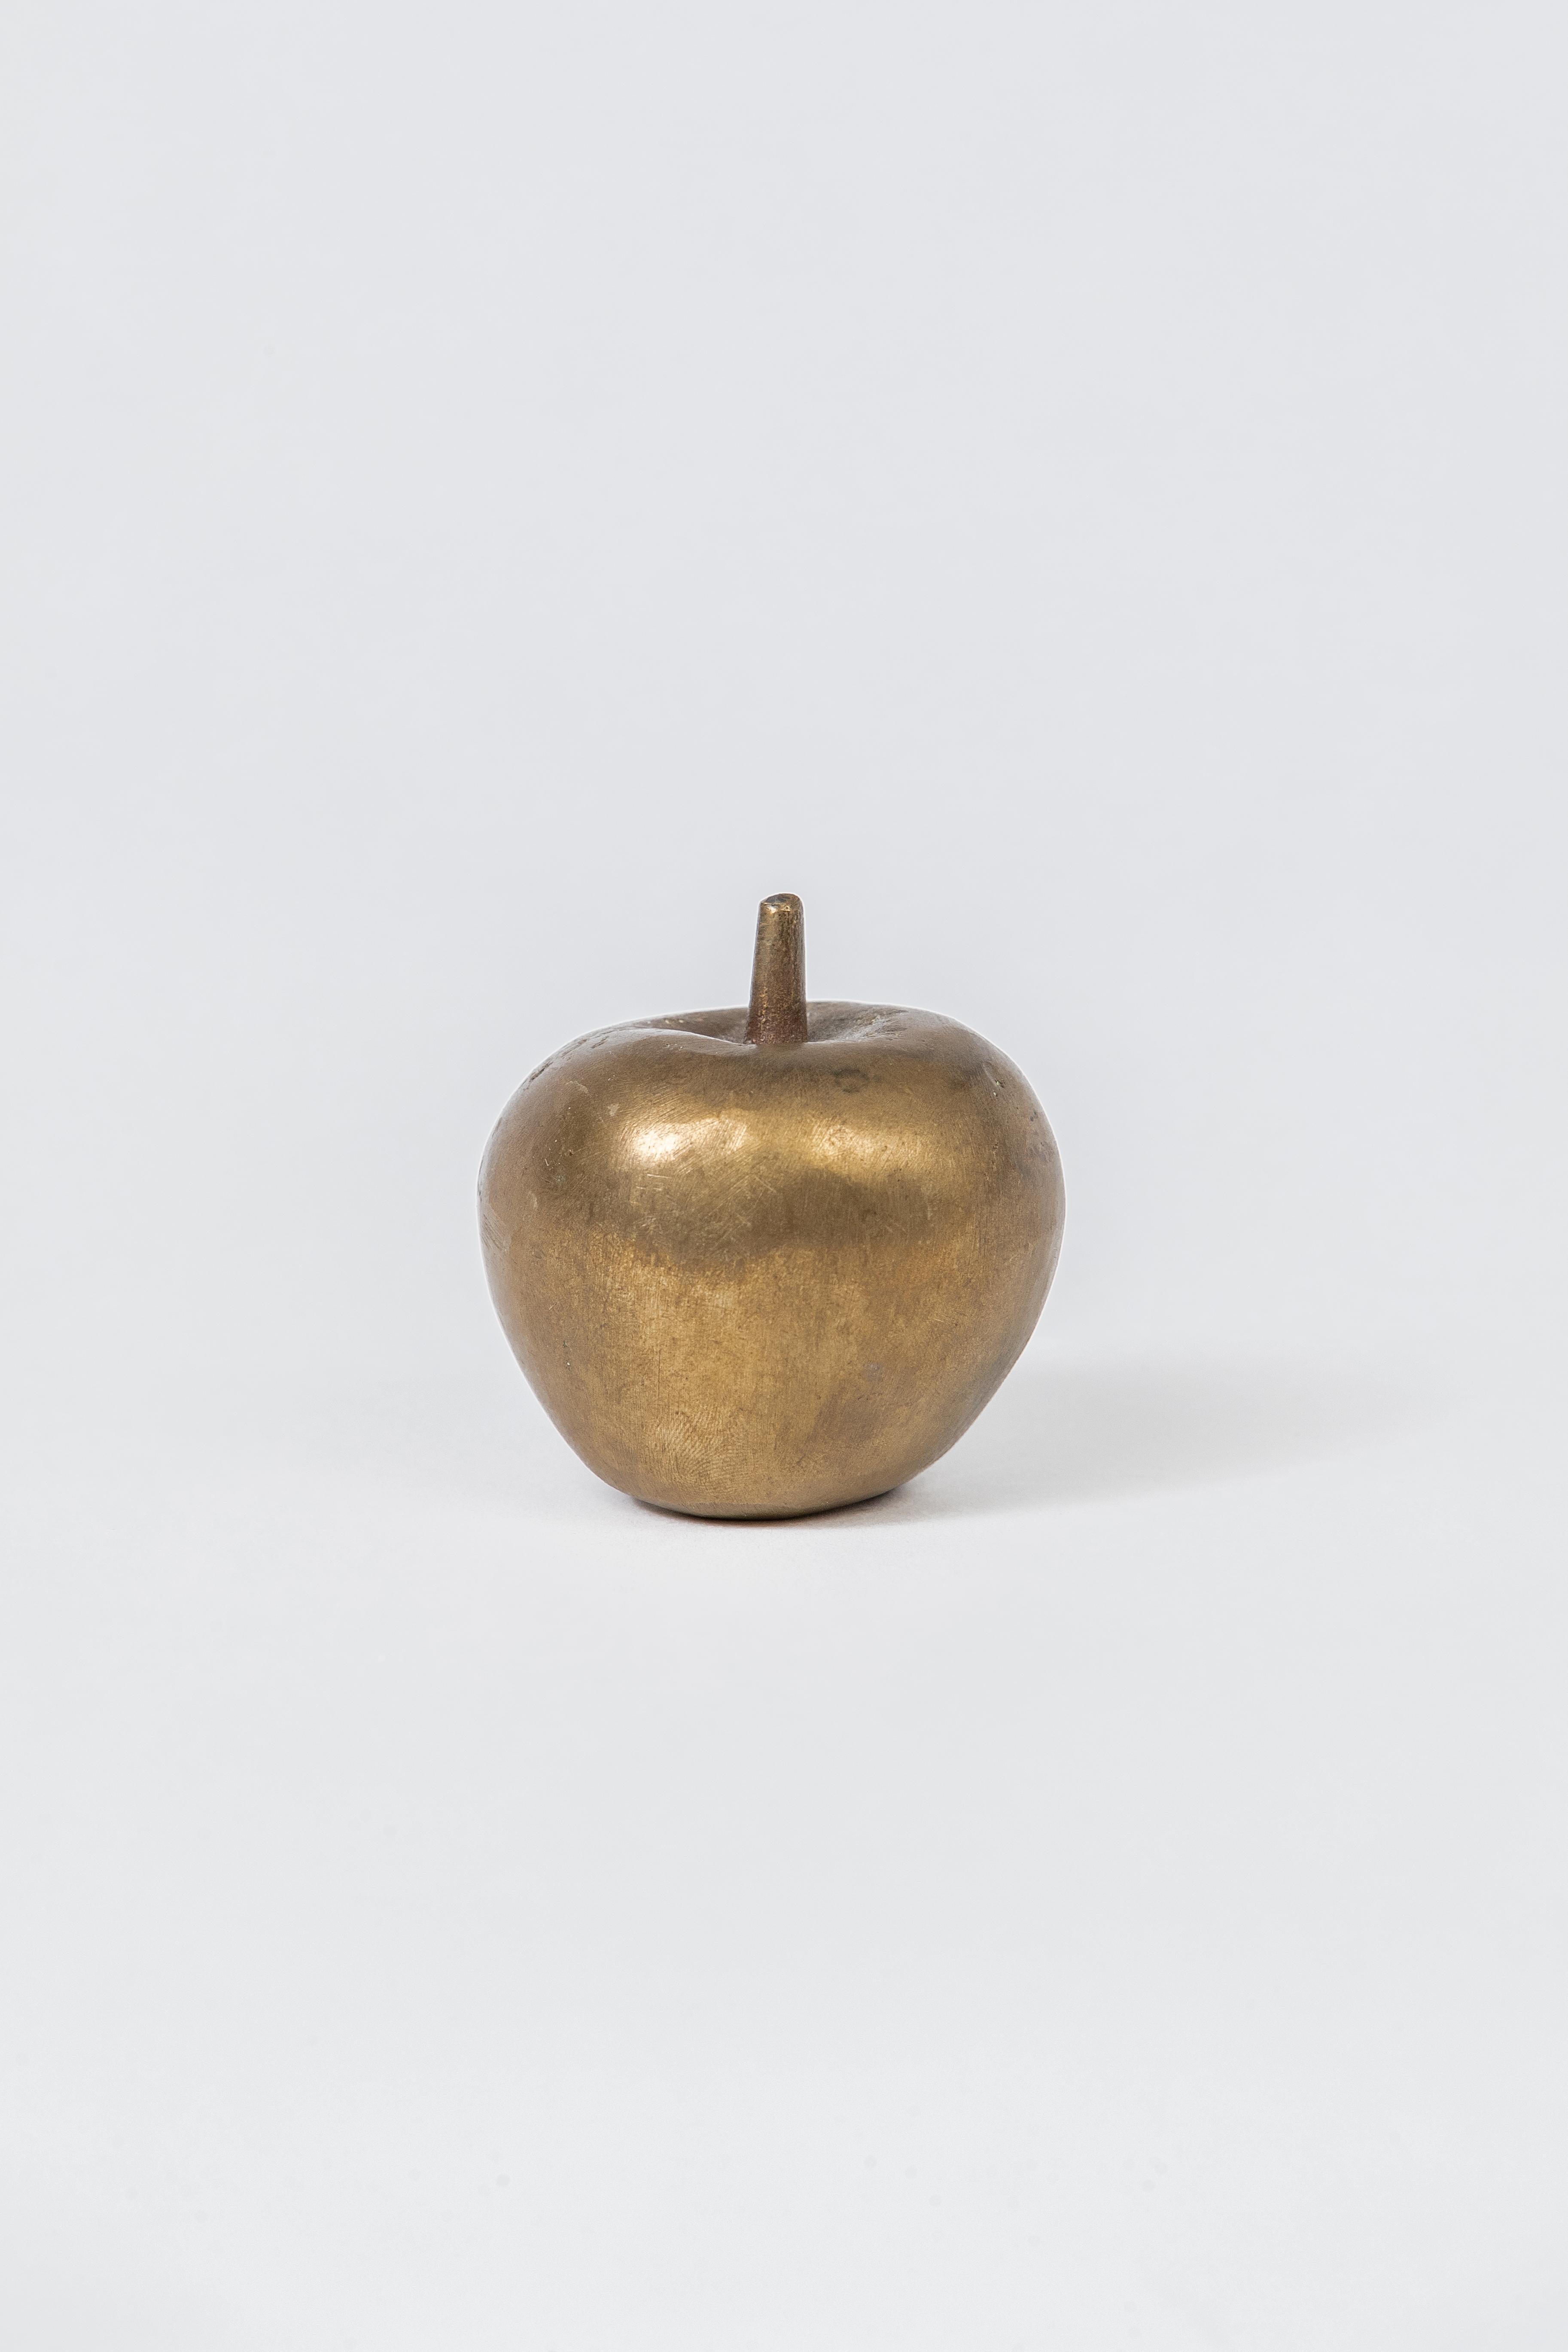 A little bronze Apple paperweight using the lost wax process.